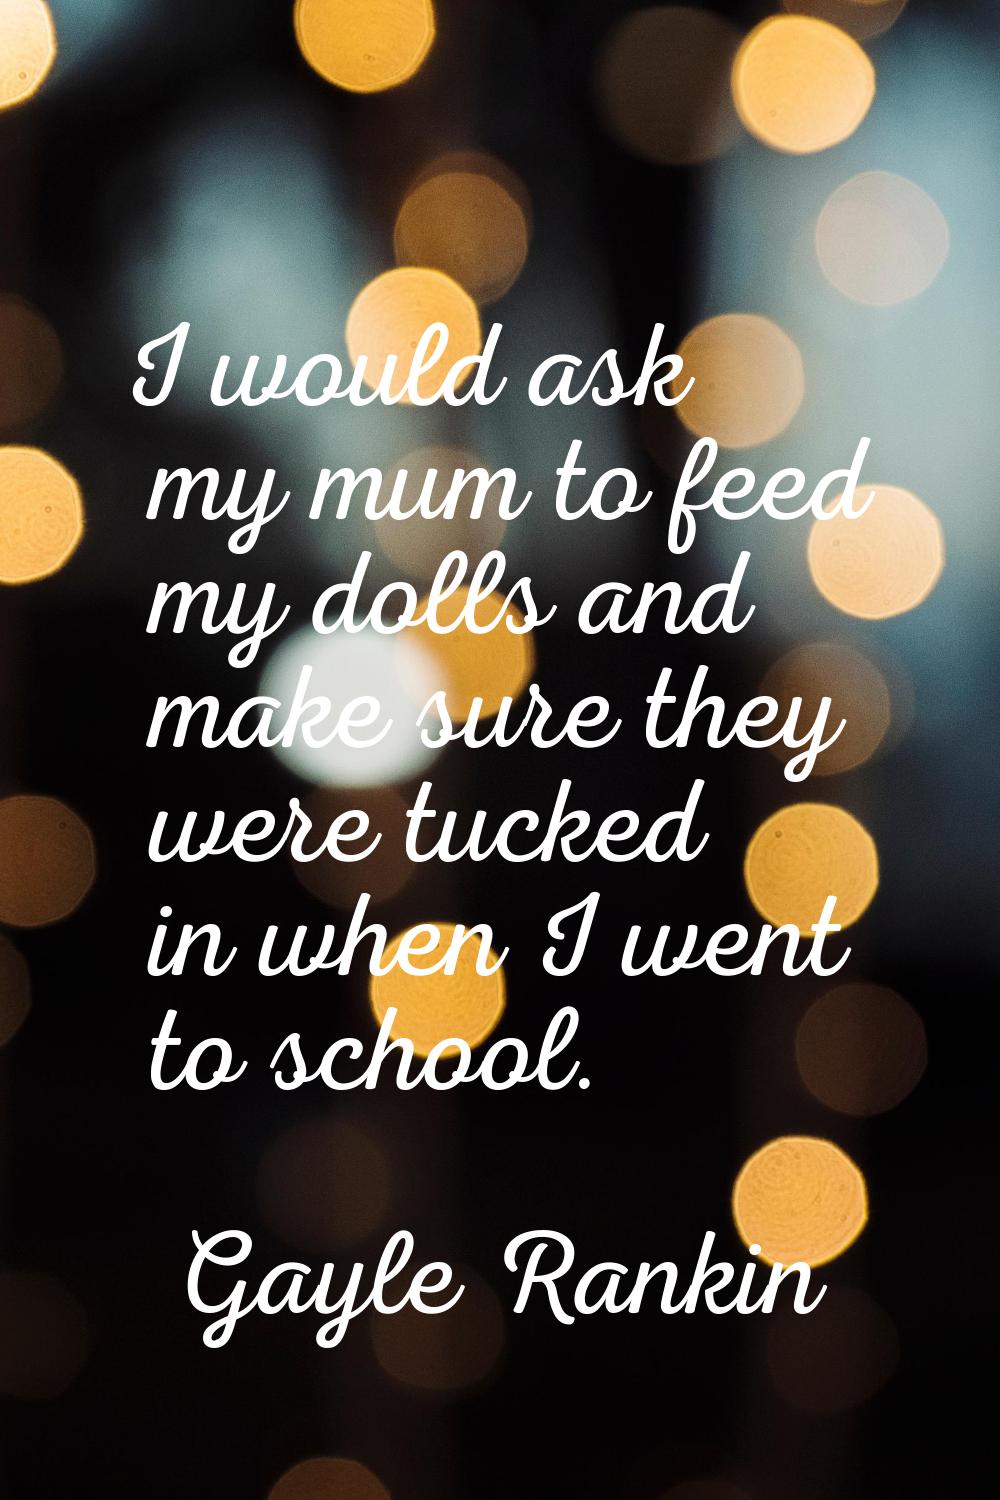 I would ask my mum to feed my dolls and make sure they were tucked in when I went to school.